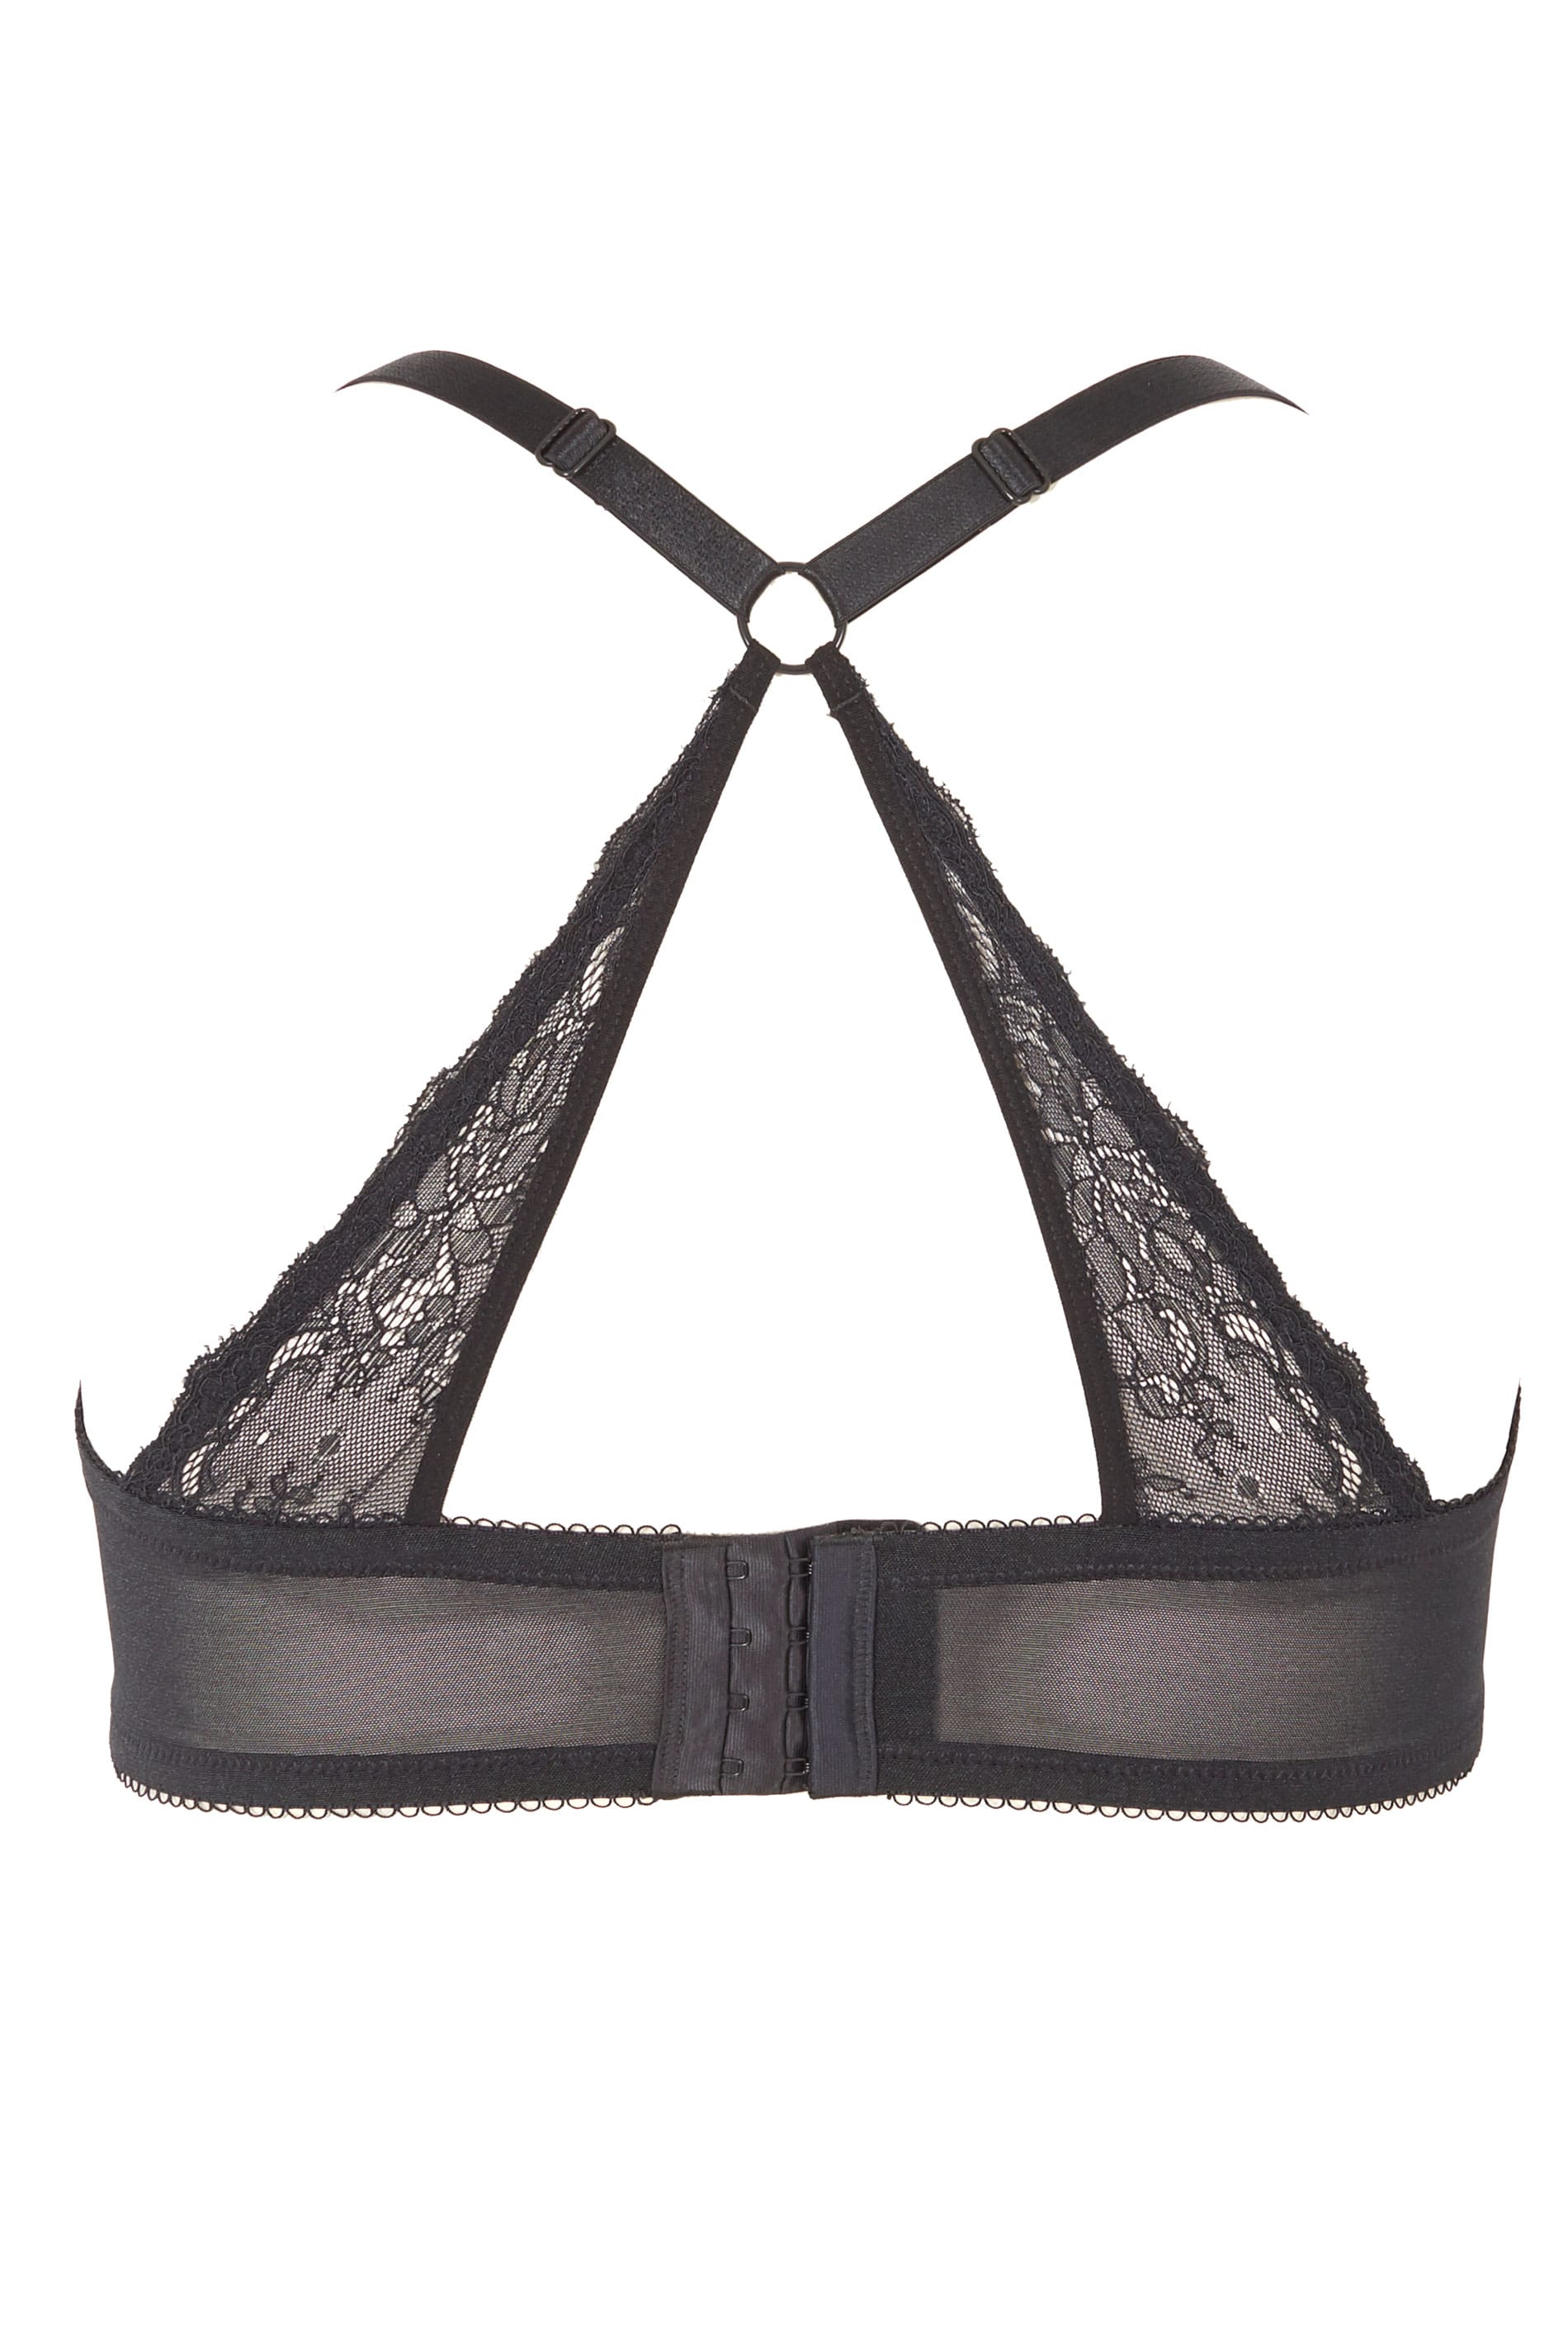 Black Wired Lace Bra With Crossover Back, Plus size 38DD to 48G